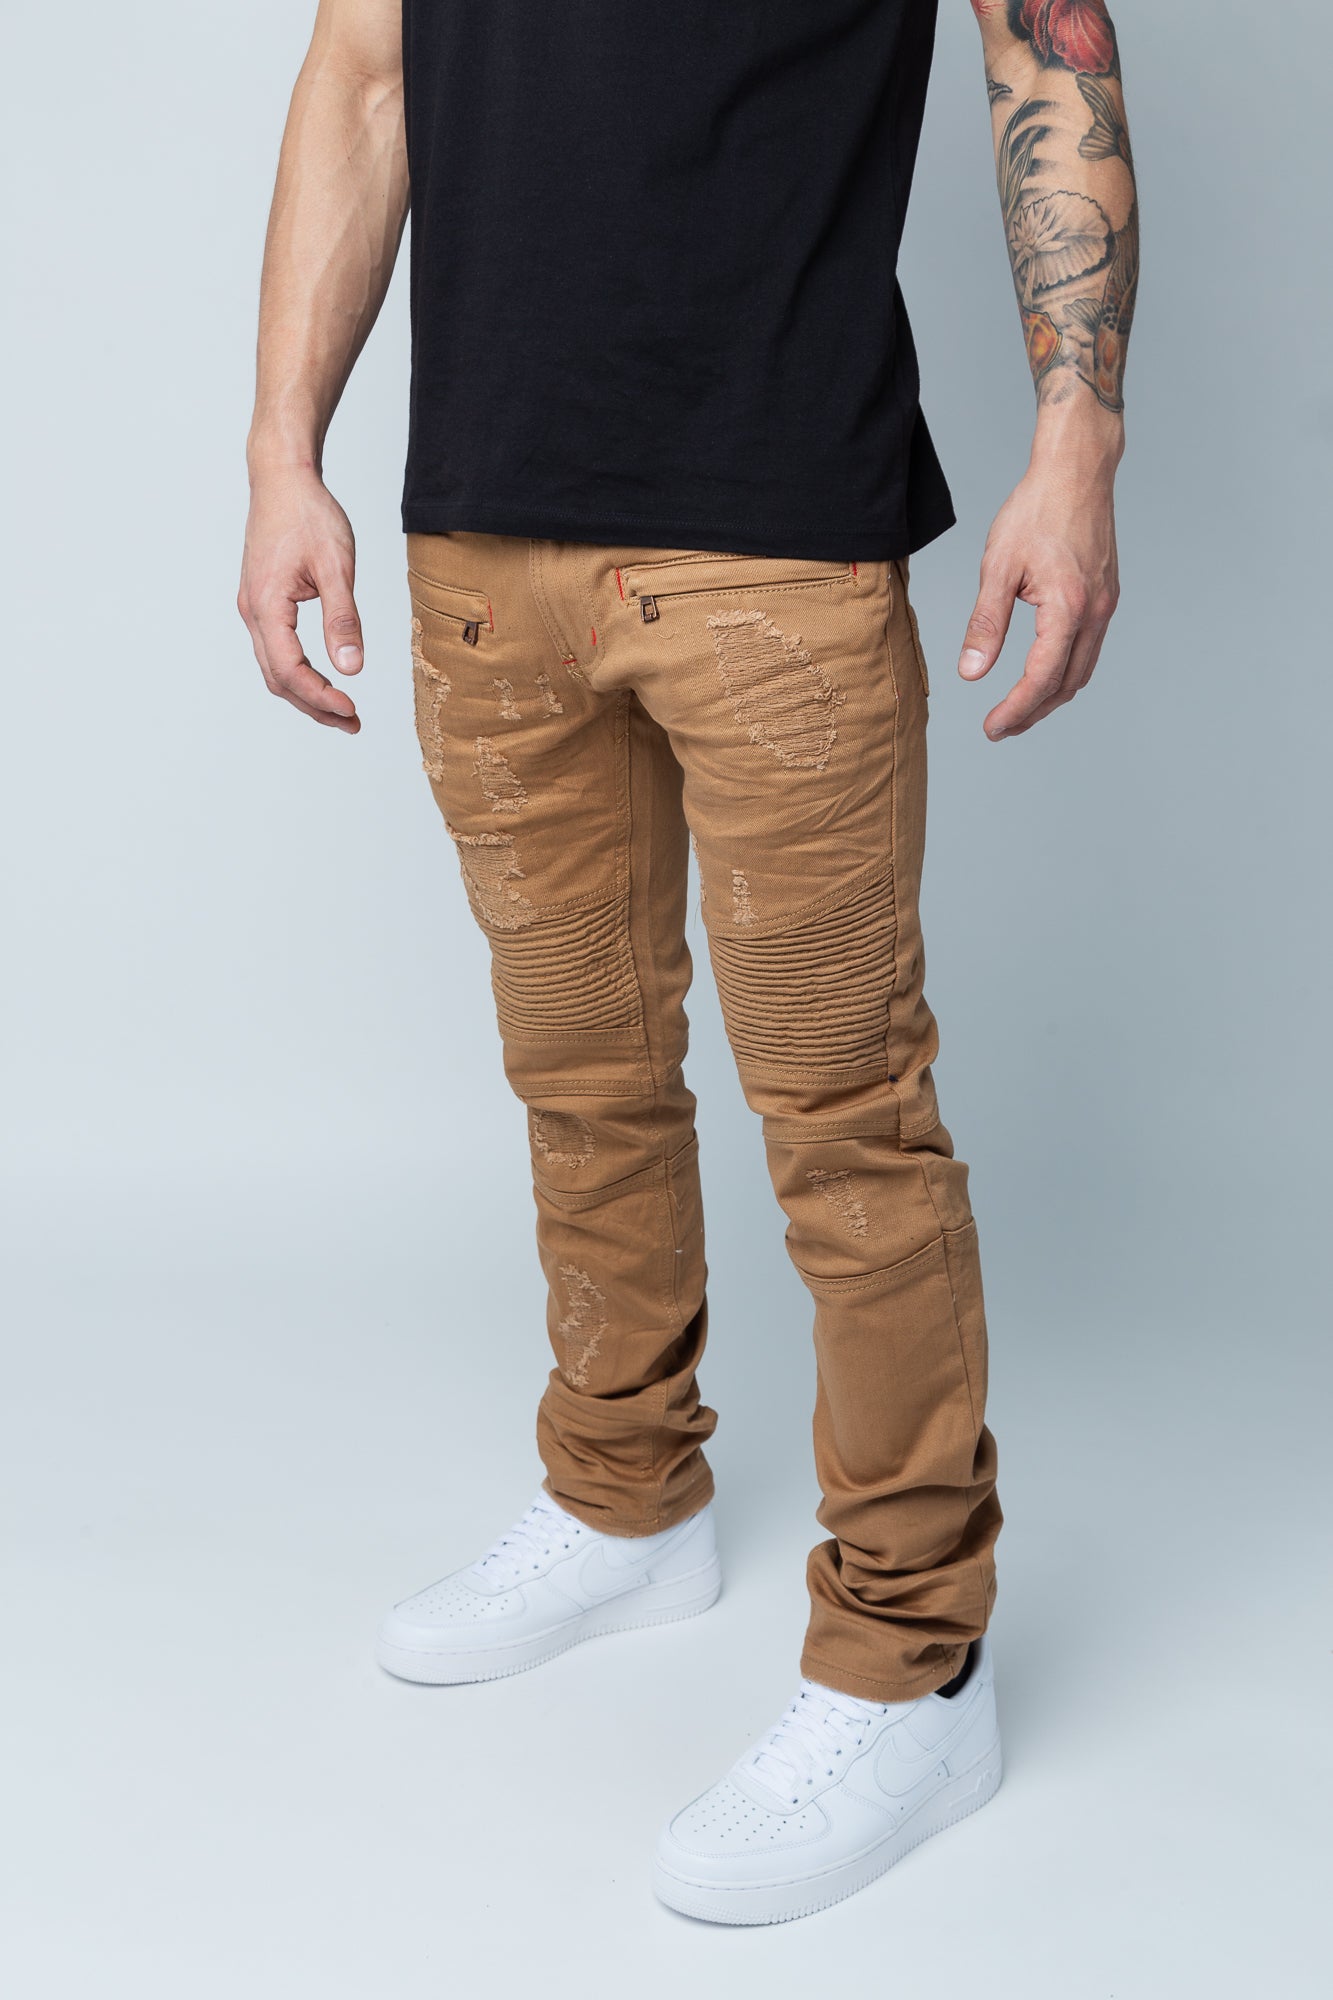 Khaki high-quality denim made from 98% cotton and 2% spandex. With its rip and repair design and slim fit, it's the ultimate blend of style and comfort.